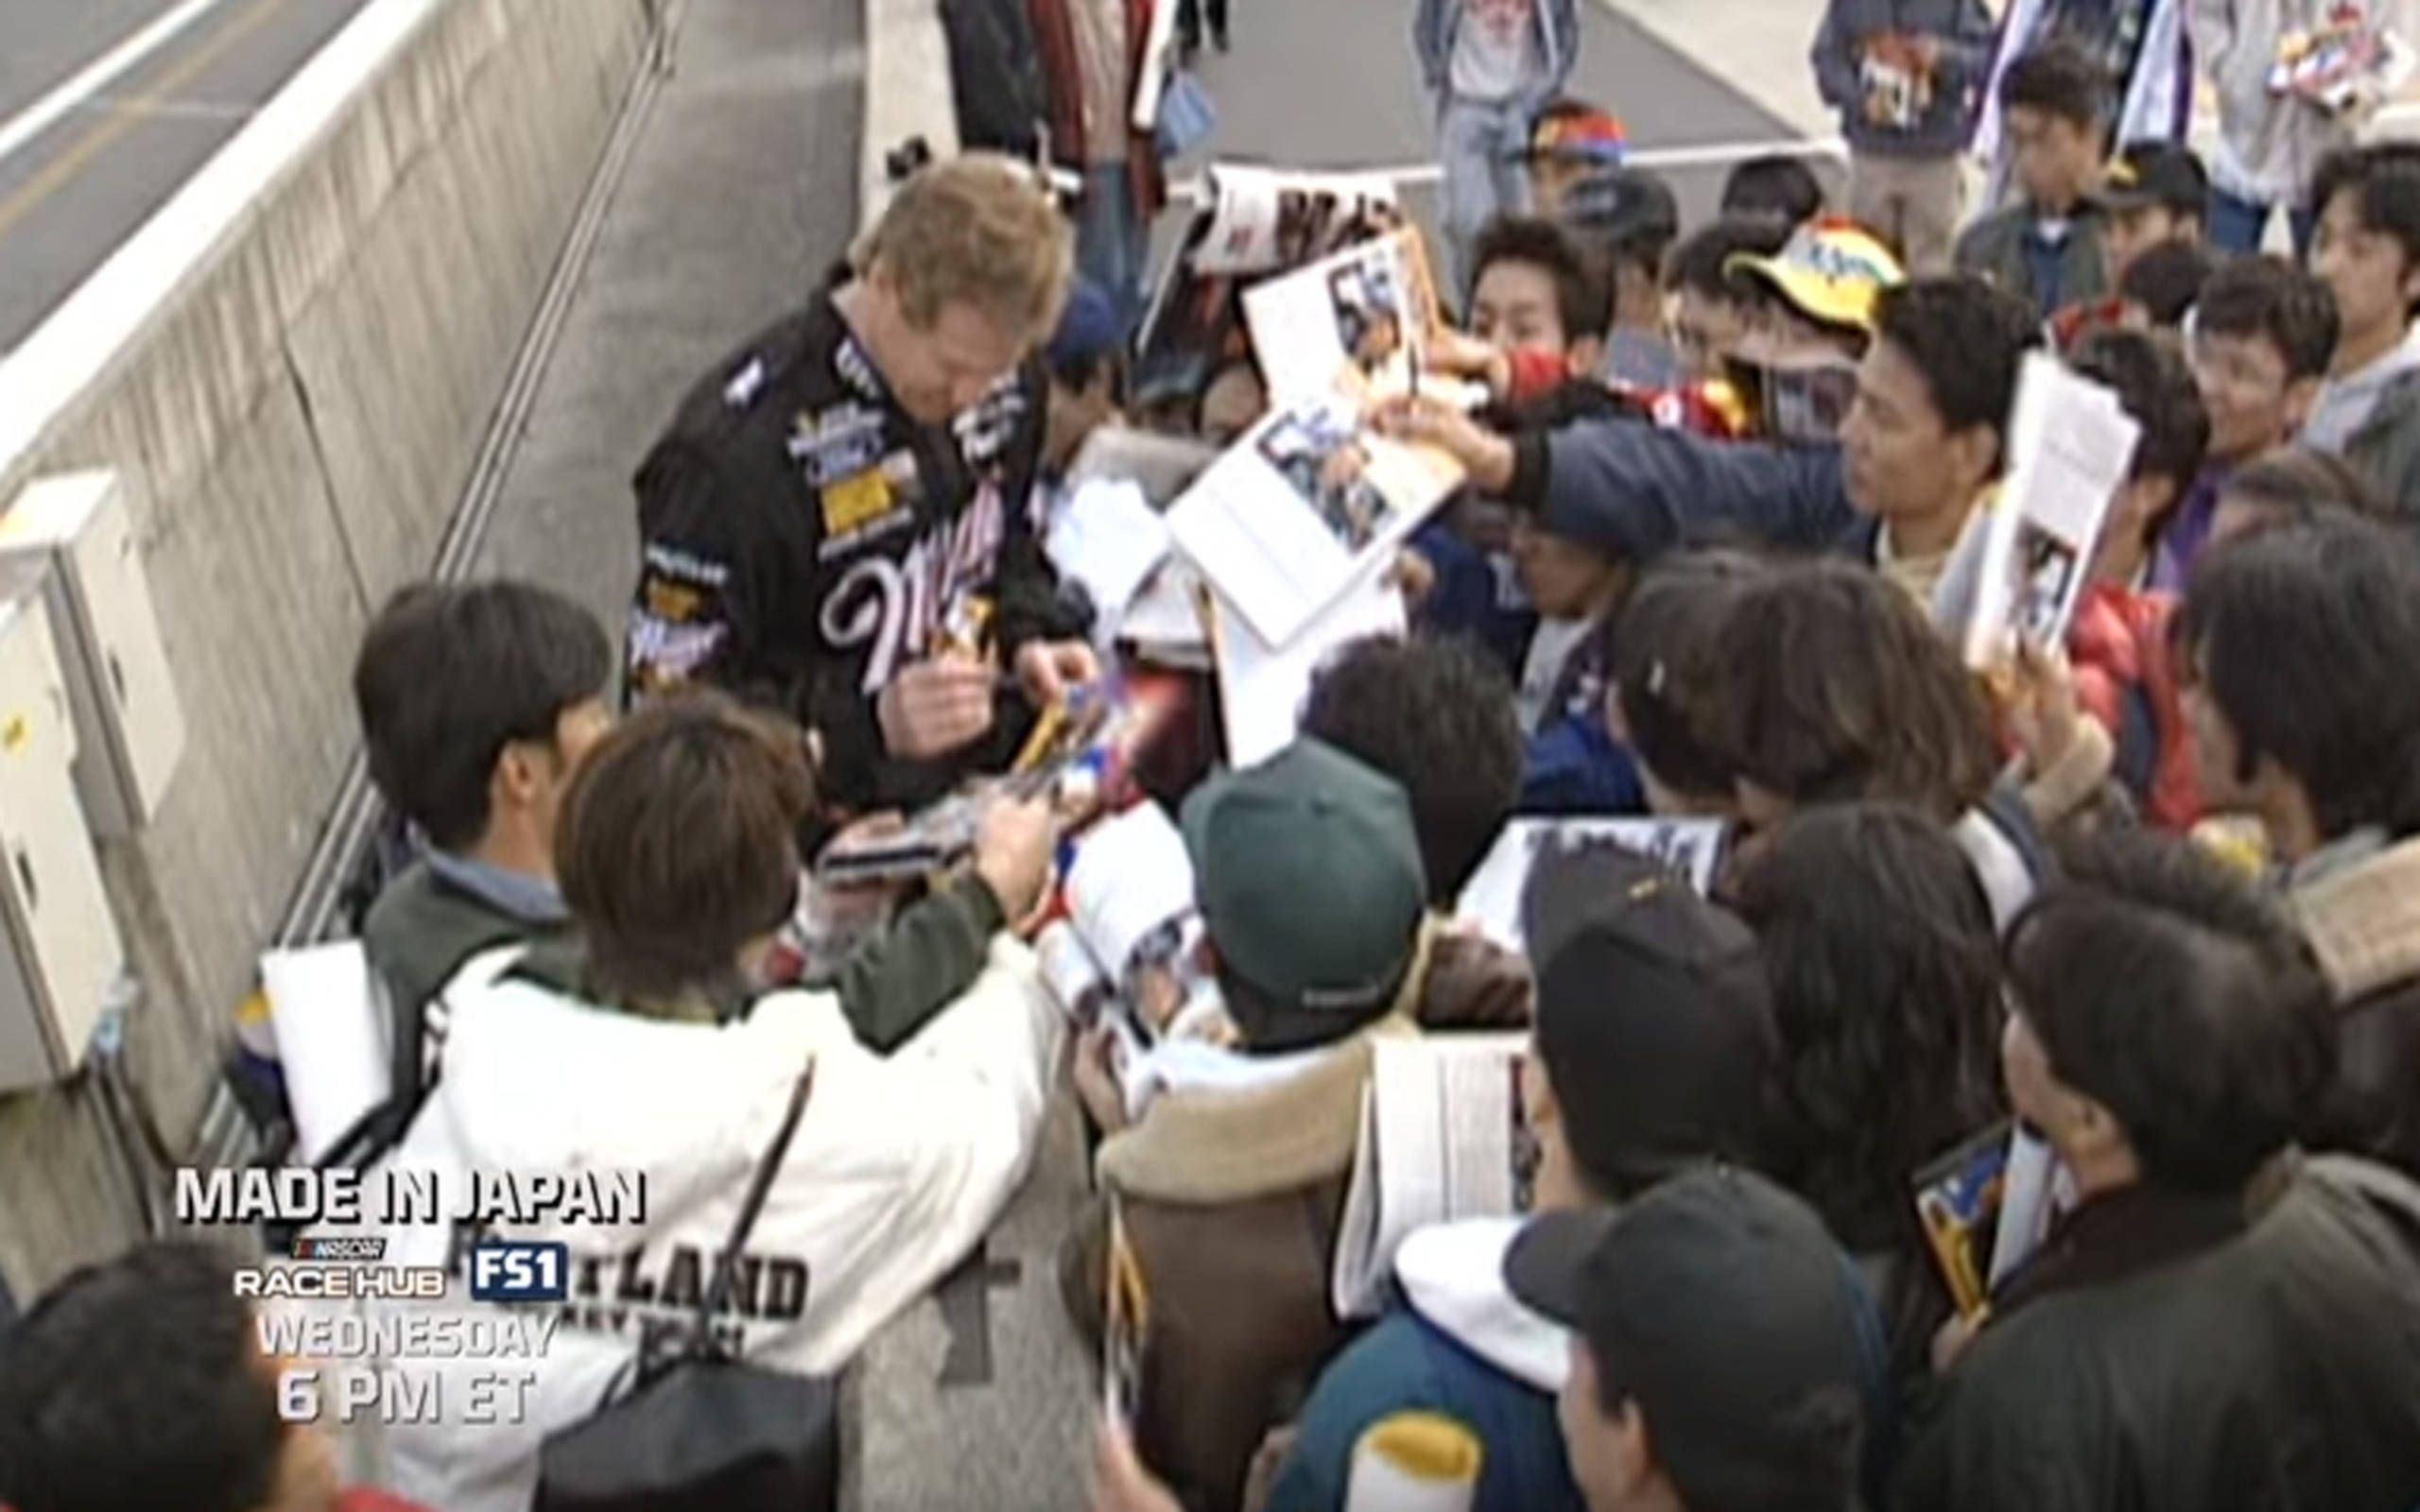 Made in Japan FS1 takes behind-the-curtain look at NASCARs 1996 race in Japan